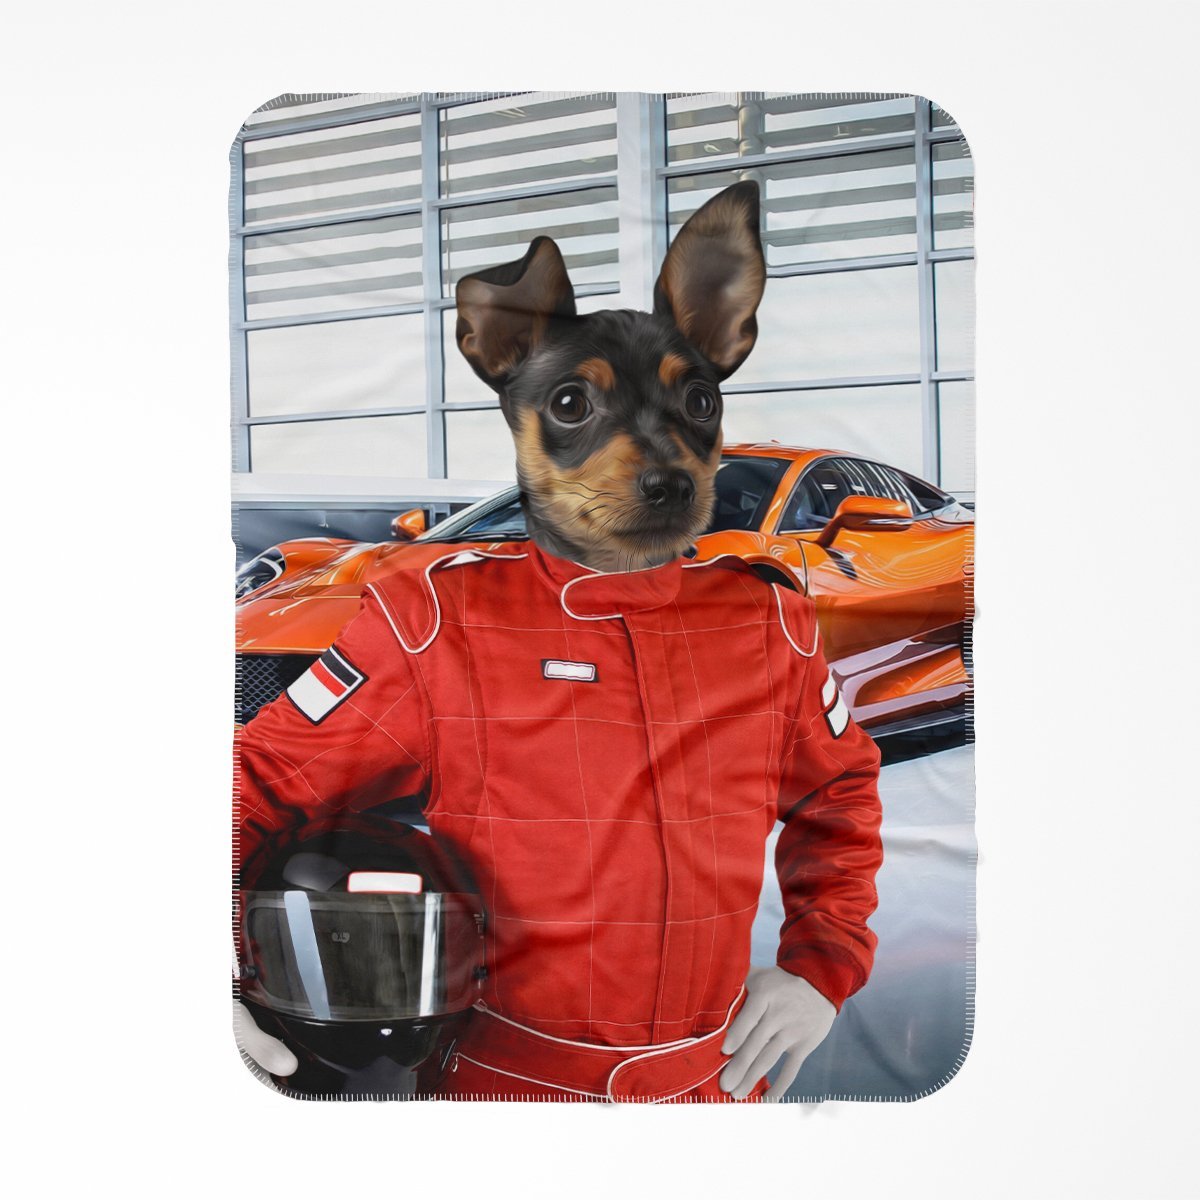 The Nascar Racer: Custom Pet Blanket - Paw & Glory - #pet portraits# - #dog portraits# - #pet portraits uk#Paw and glory, Pet portraits blanket,dog caricatures, portrait of pet from photo, Pet gifts, modern pet portraits, oil paintings of dogs